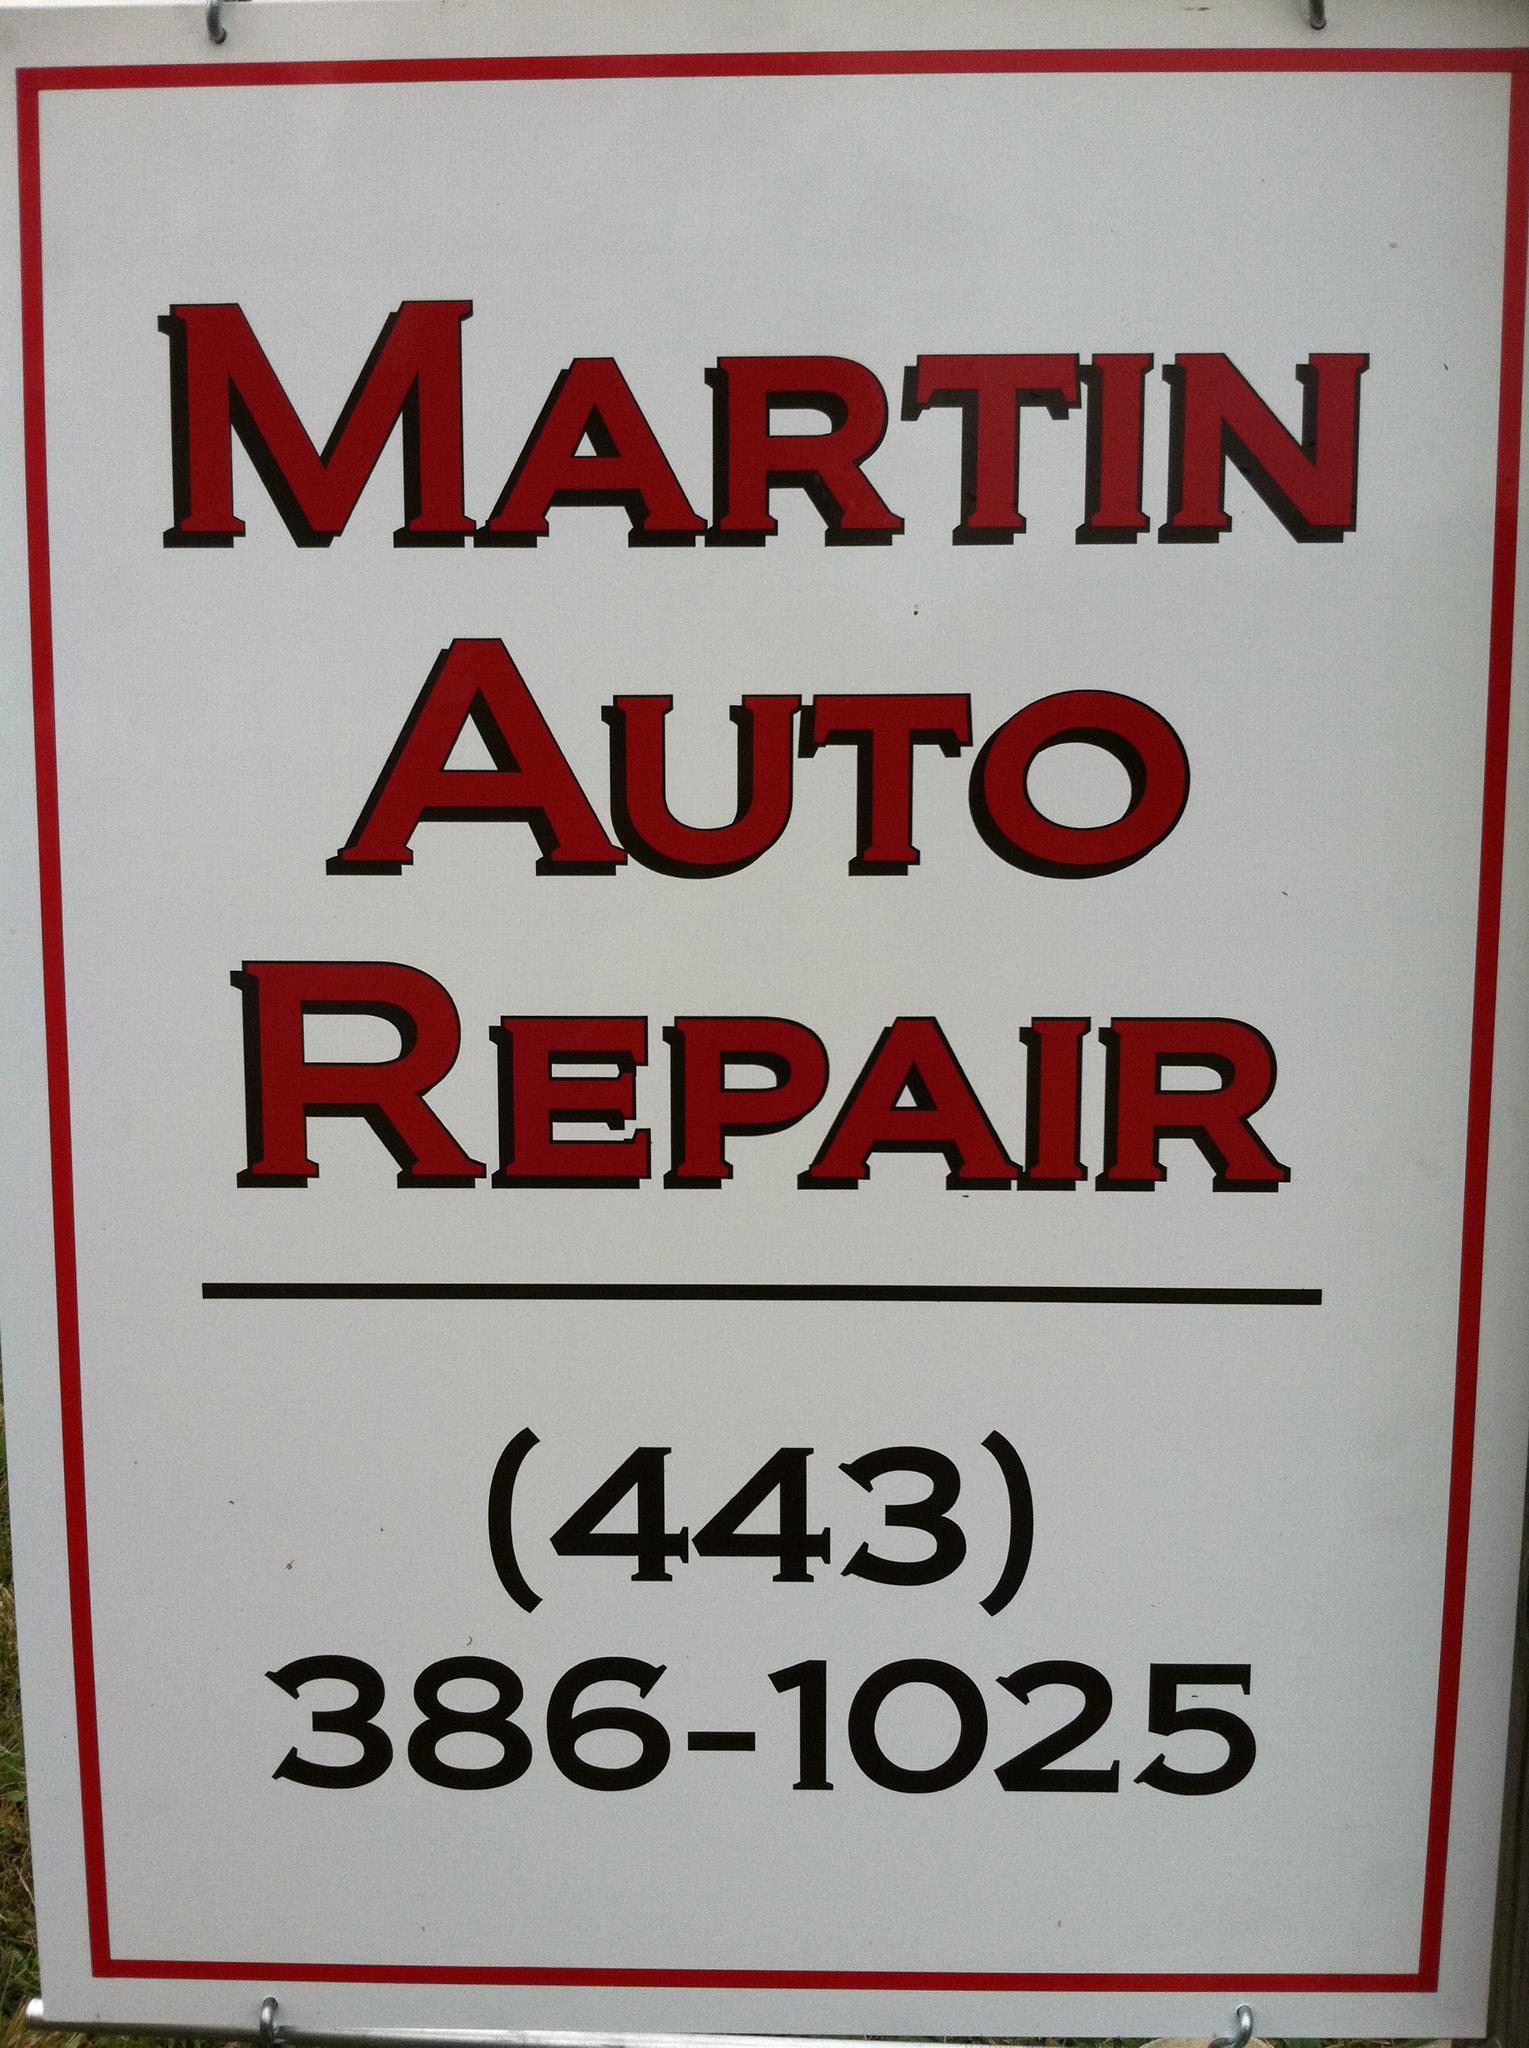 Martin Auto Repair Inc. 35425 Laws Rd, Pittsville Maryland 21850